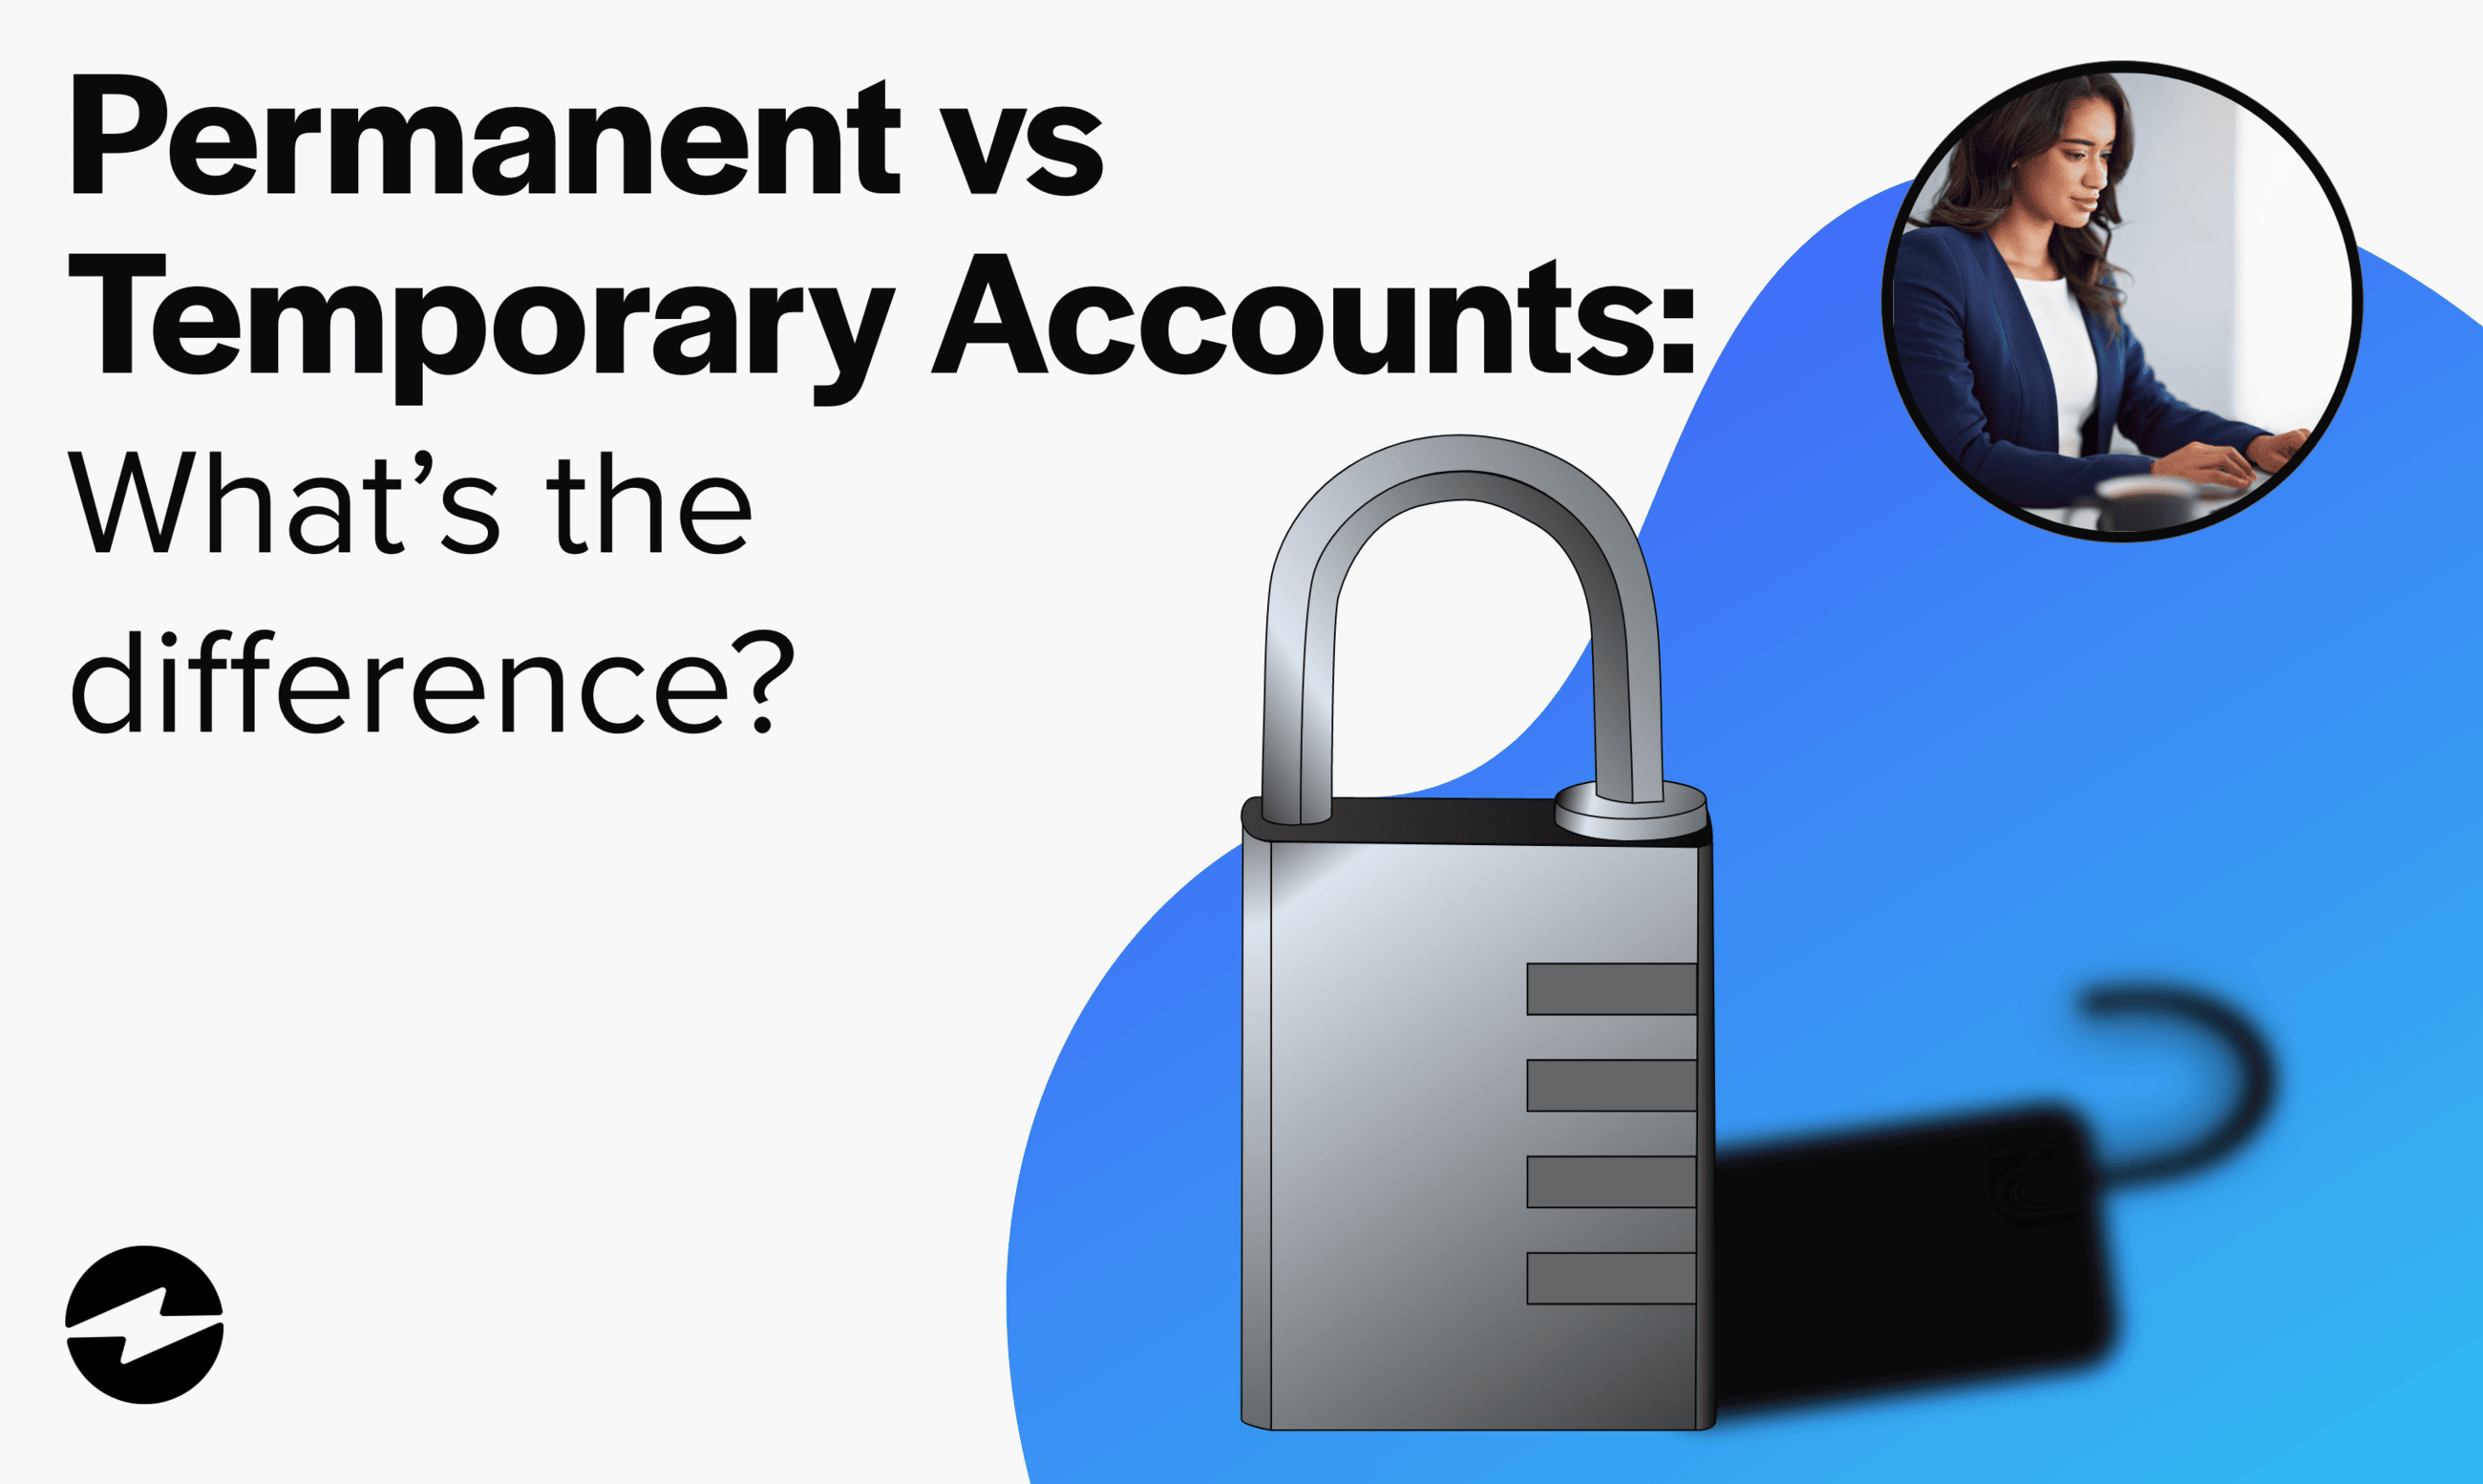 Permanent vs Temporary Accounts: What's the Difference?